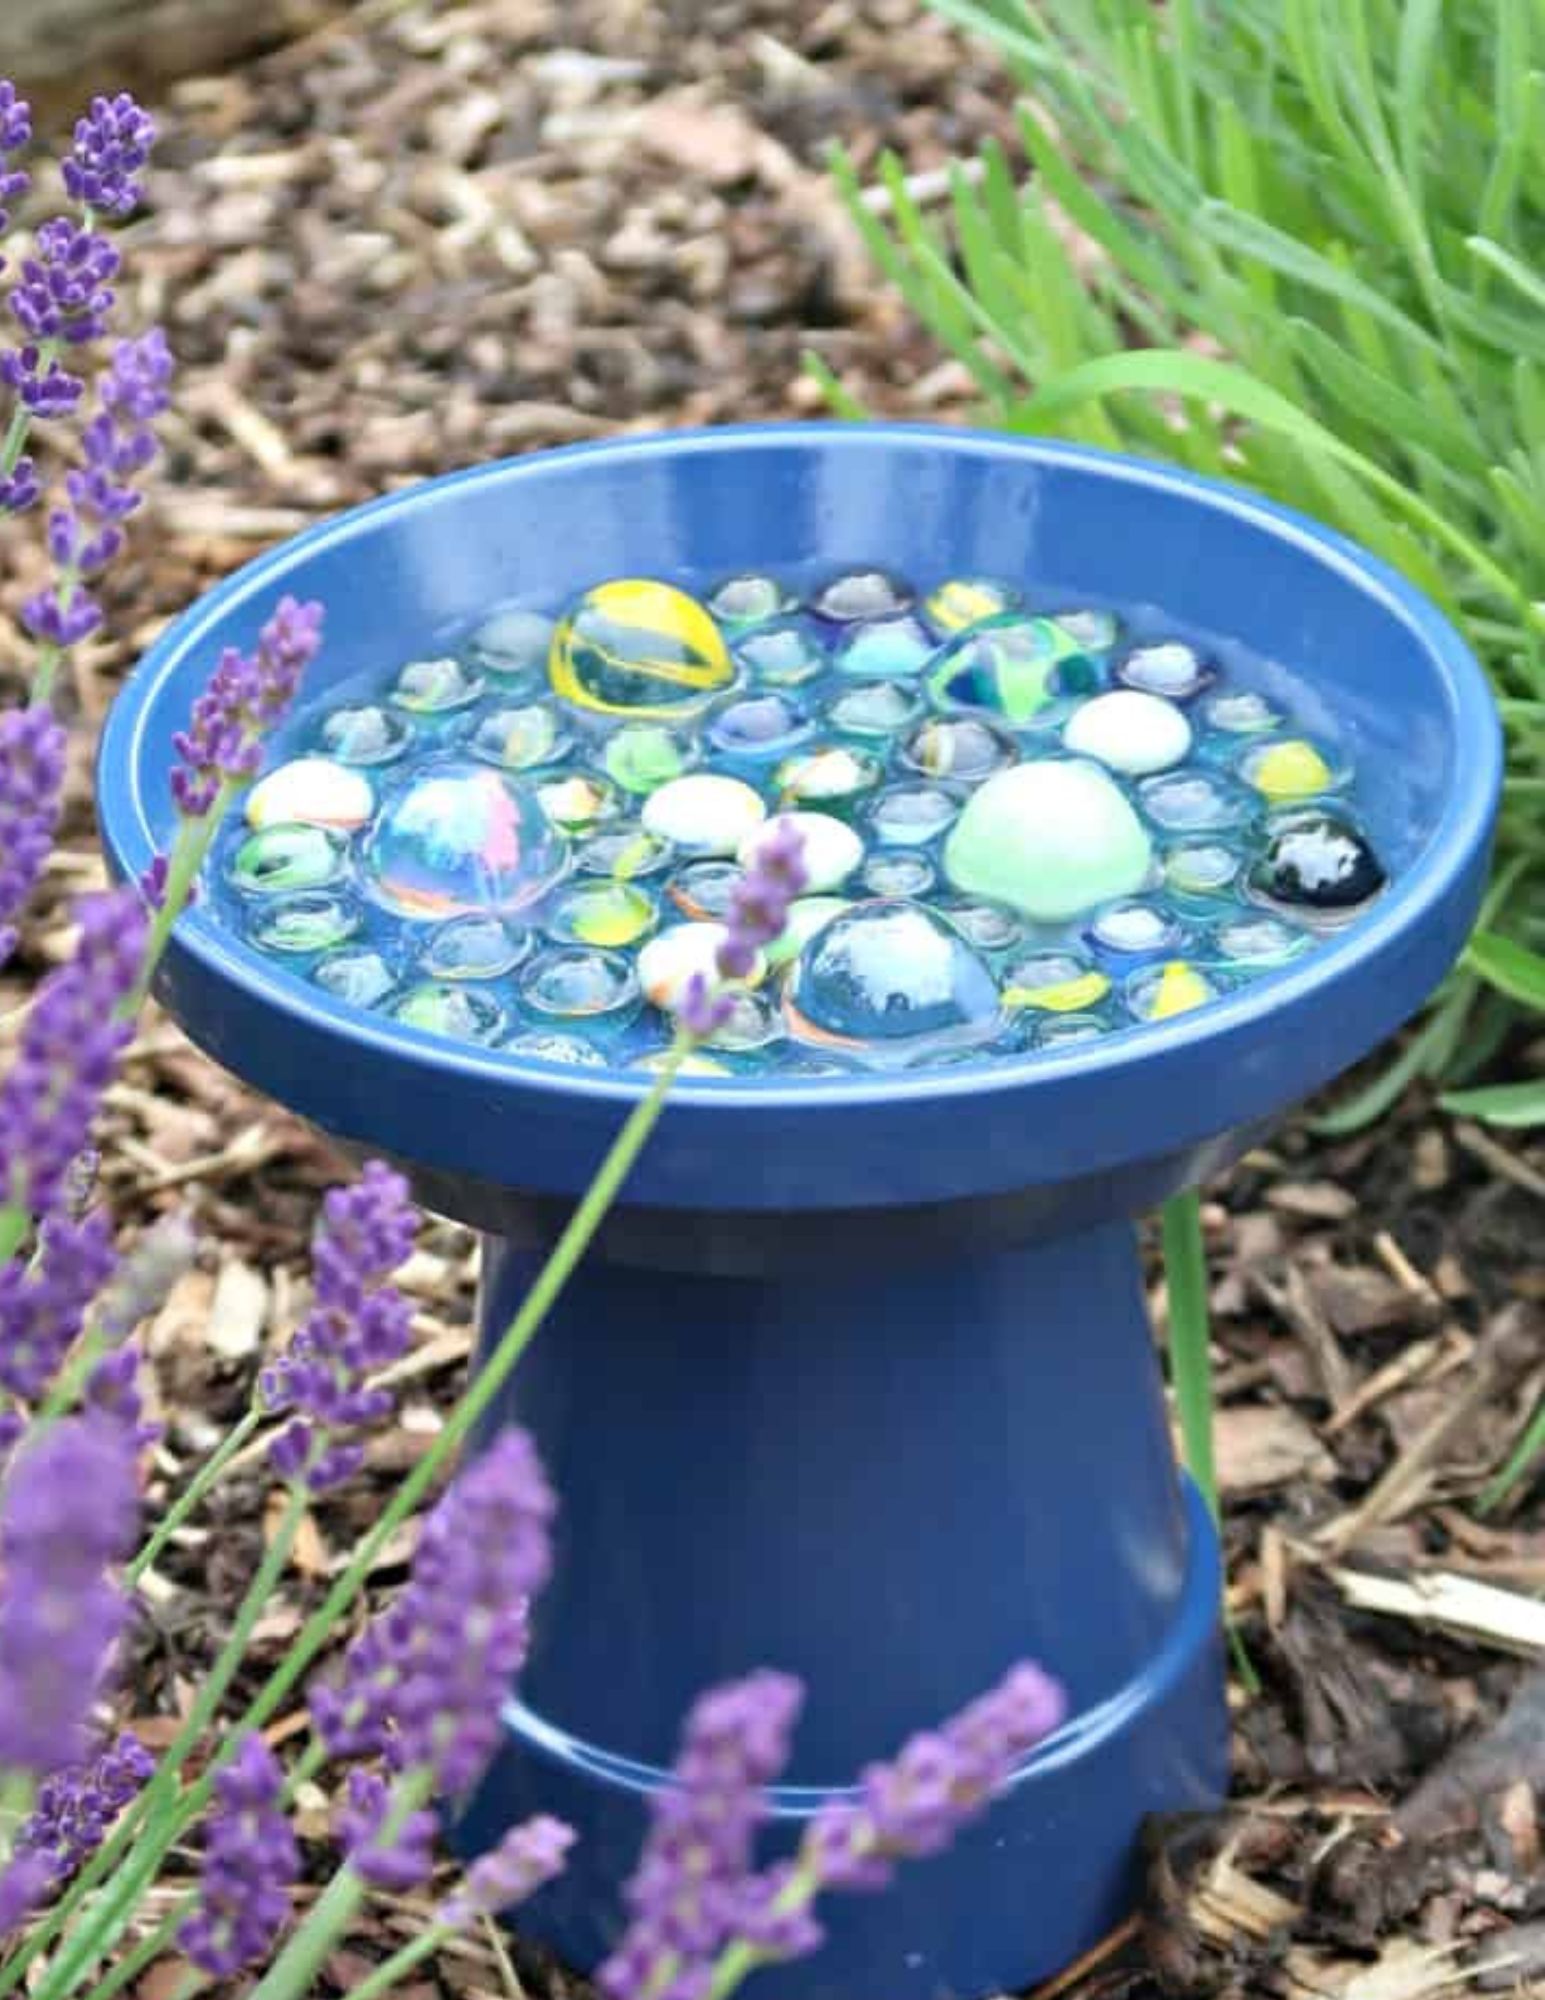 blue terra cotta pot with saucer for bees